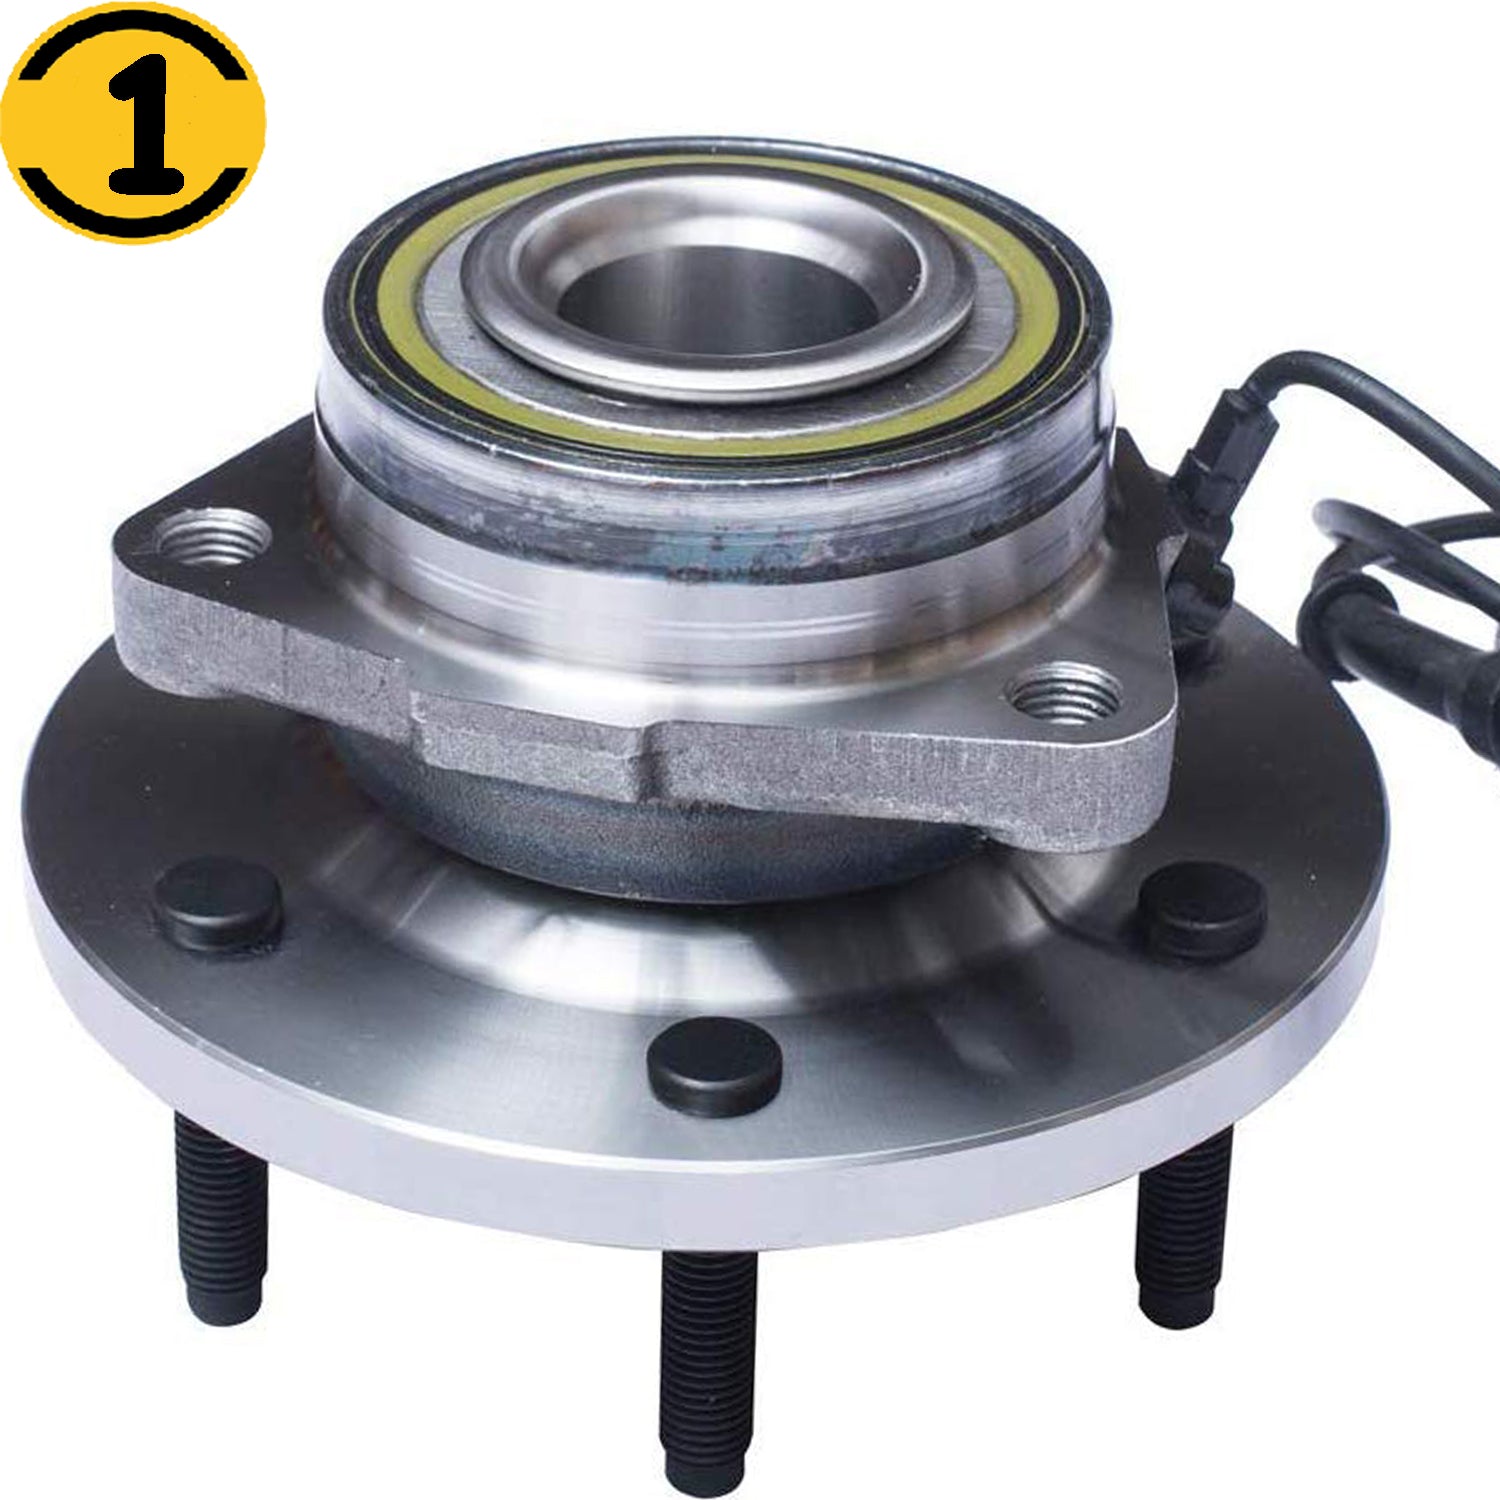 MotorbyMotor 515093 Front Wheel Bearing and Hub Assembly with 6 Lugs for Hummer H3 Low-Runout OE Replacement Hub Bearing w/ABS MotorbyMotor